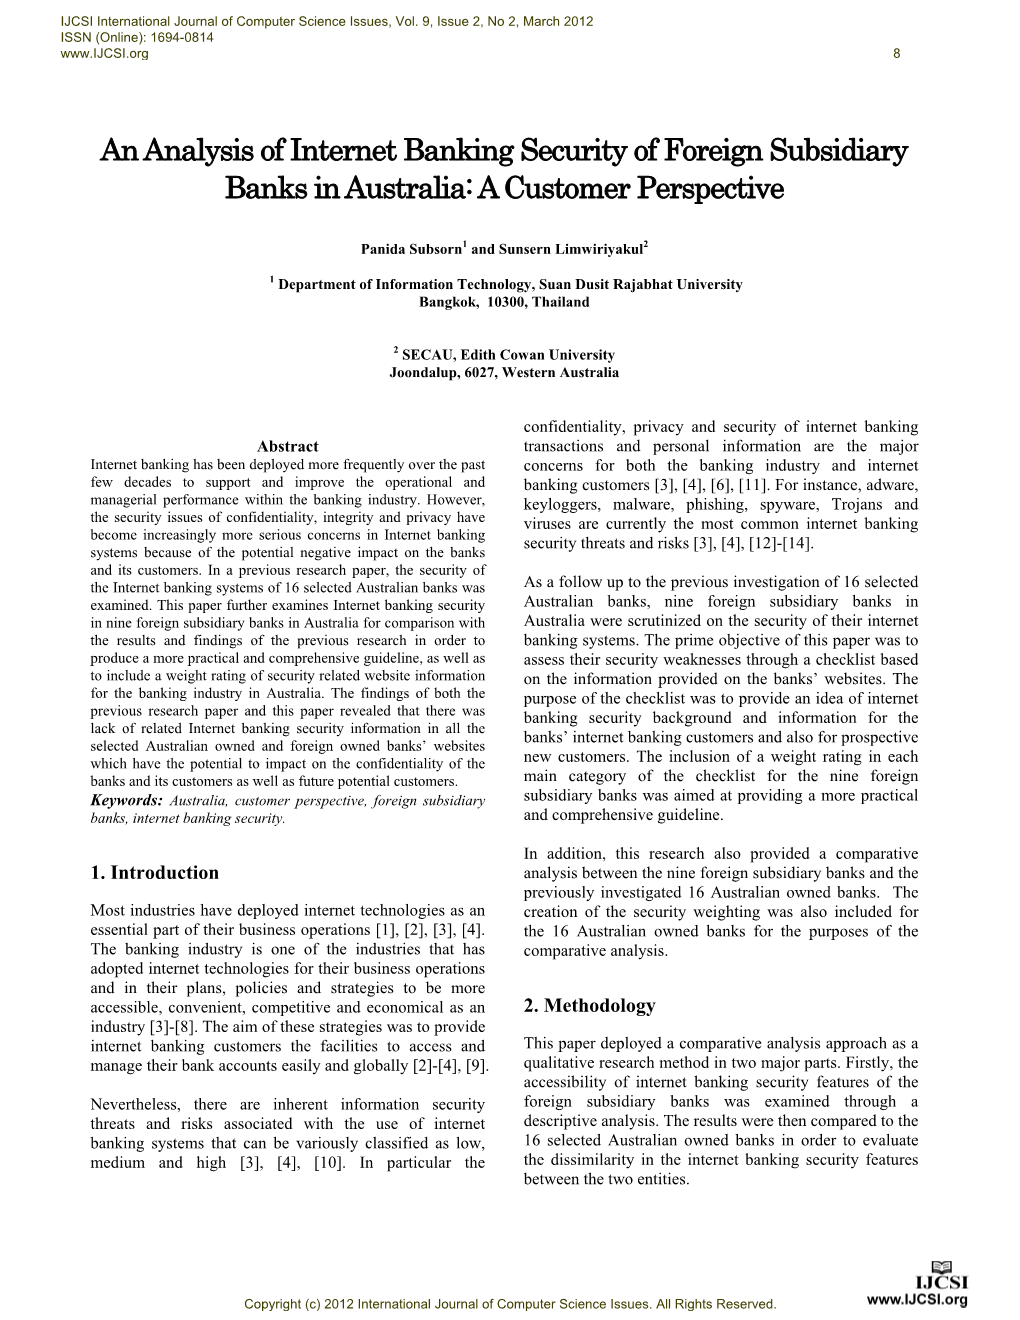 An Analysis of Internet Banking Security of Foreign Subsidiary Banks in Australia: a Customer Perspective